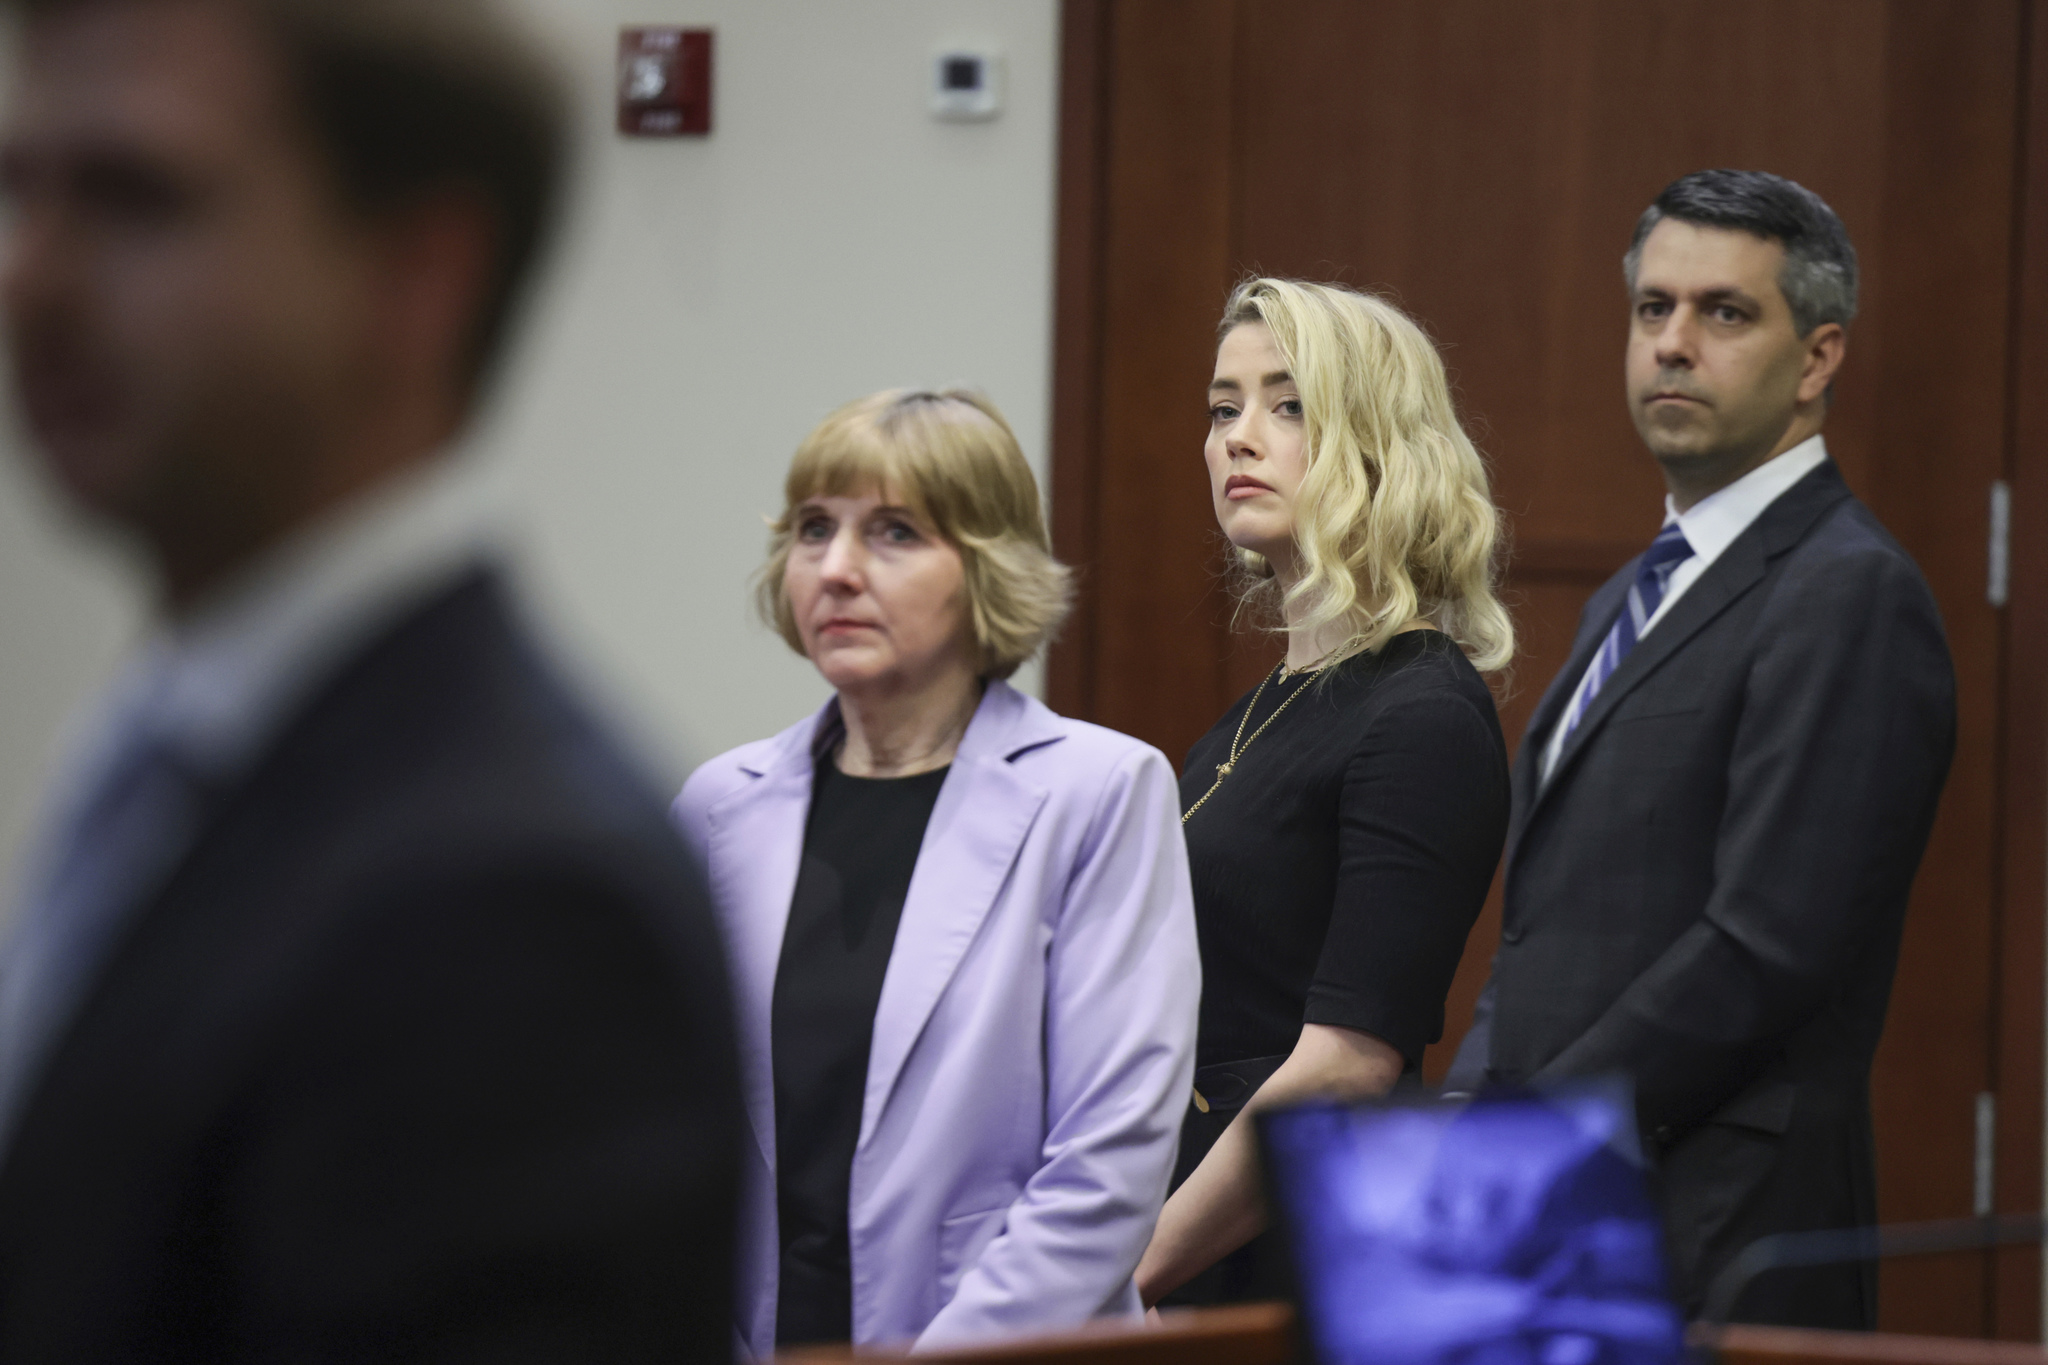 Actor  lt;HIT gt;Amber lt;/HIT gt;  lt;HIT gt;Heard lt;/HIT gt; stands with her lawyers Elaine Bredehoft and Benjamin Rottenborn before the verdict was read at the Fairfax County Circuit Courthouse in Fairfax, Va, Wednesday, June 1, 2022. The jury awarded Johnny Depp more than $10 million in his libel lawsuit against ex-wife  lt;HIT gt;Amber lt;/HIT gt;  lt;HIT gt;Heard lt;/HIT gt;. It vindicates his stance that  lt;HIT gt;Heard lt;/HIT gt; fabricated claims that she was abused by Depp before and during their brief marriage. But the jury also found in favor of  lt;HIT gt;Heard lt;/HIT gt;, who said she was defamed by a lawyer for Depp.(Evelyn Hockstein/Pool via AP)